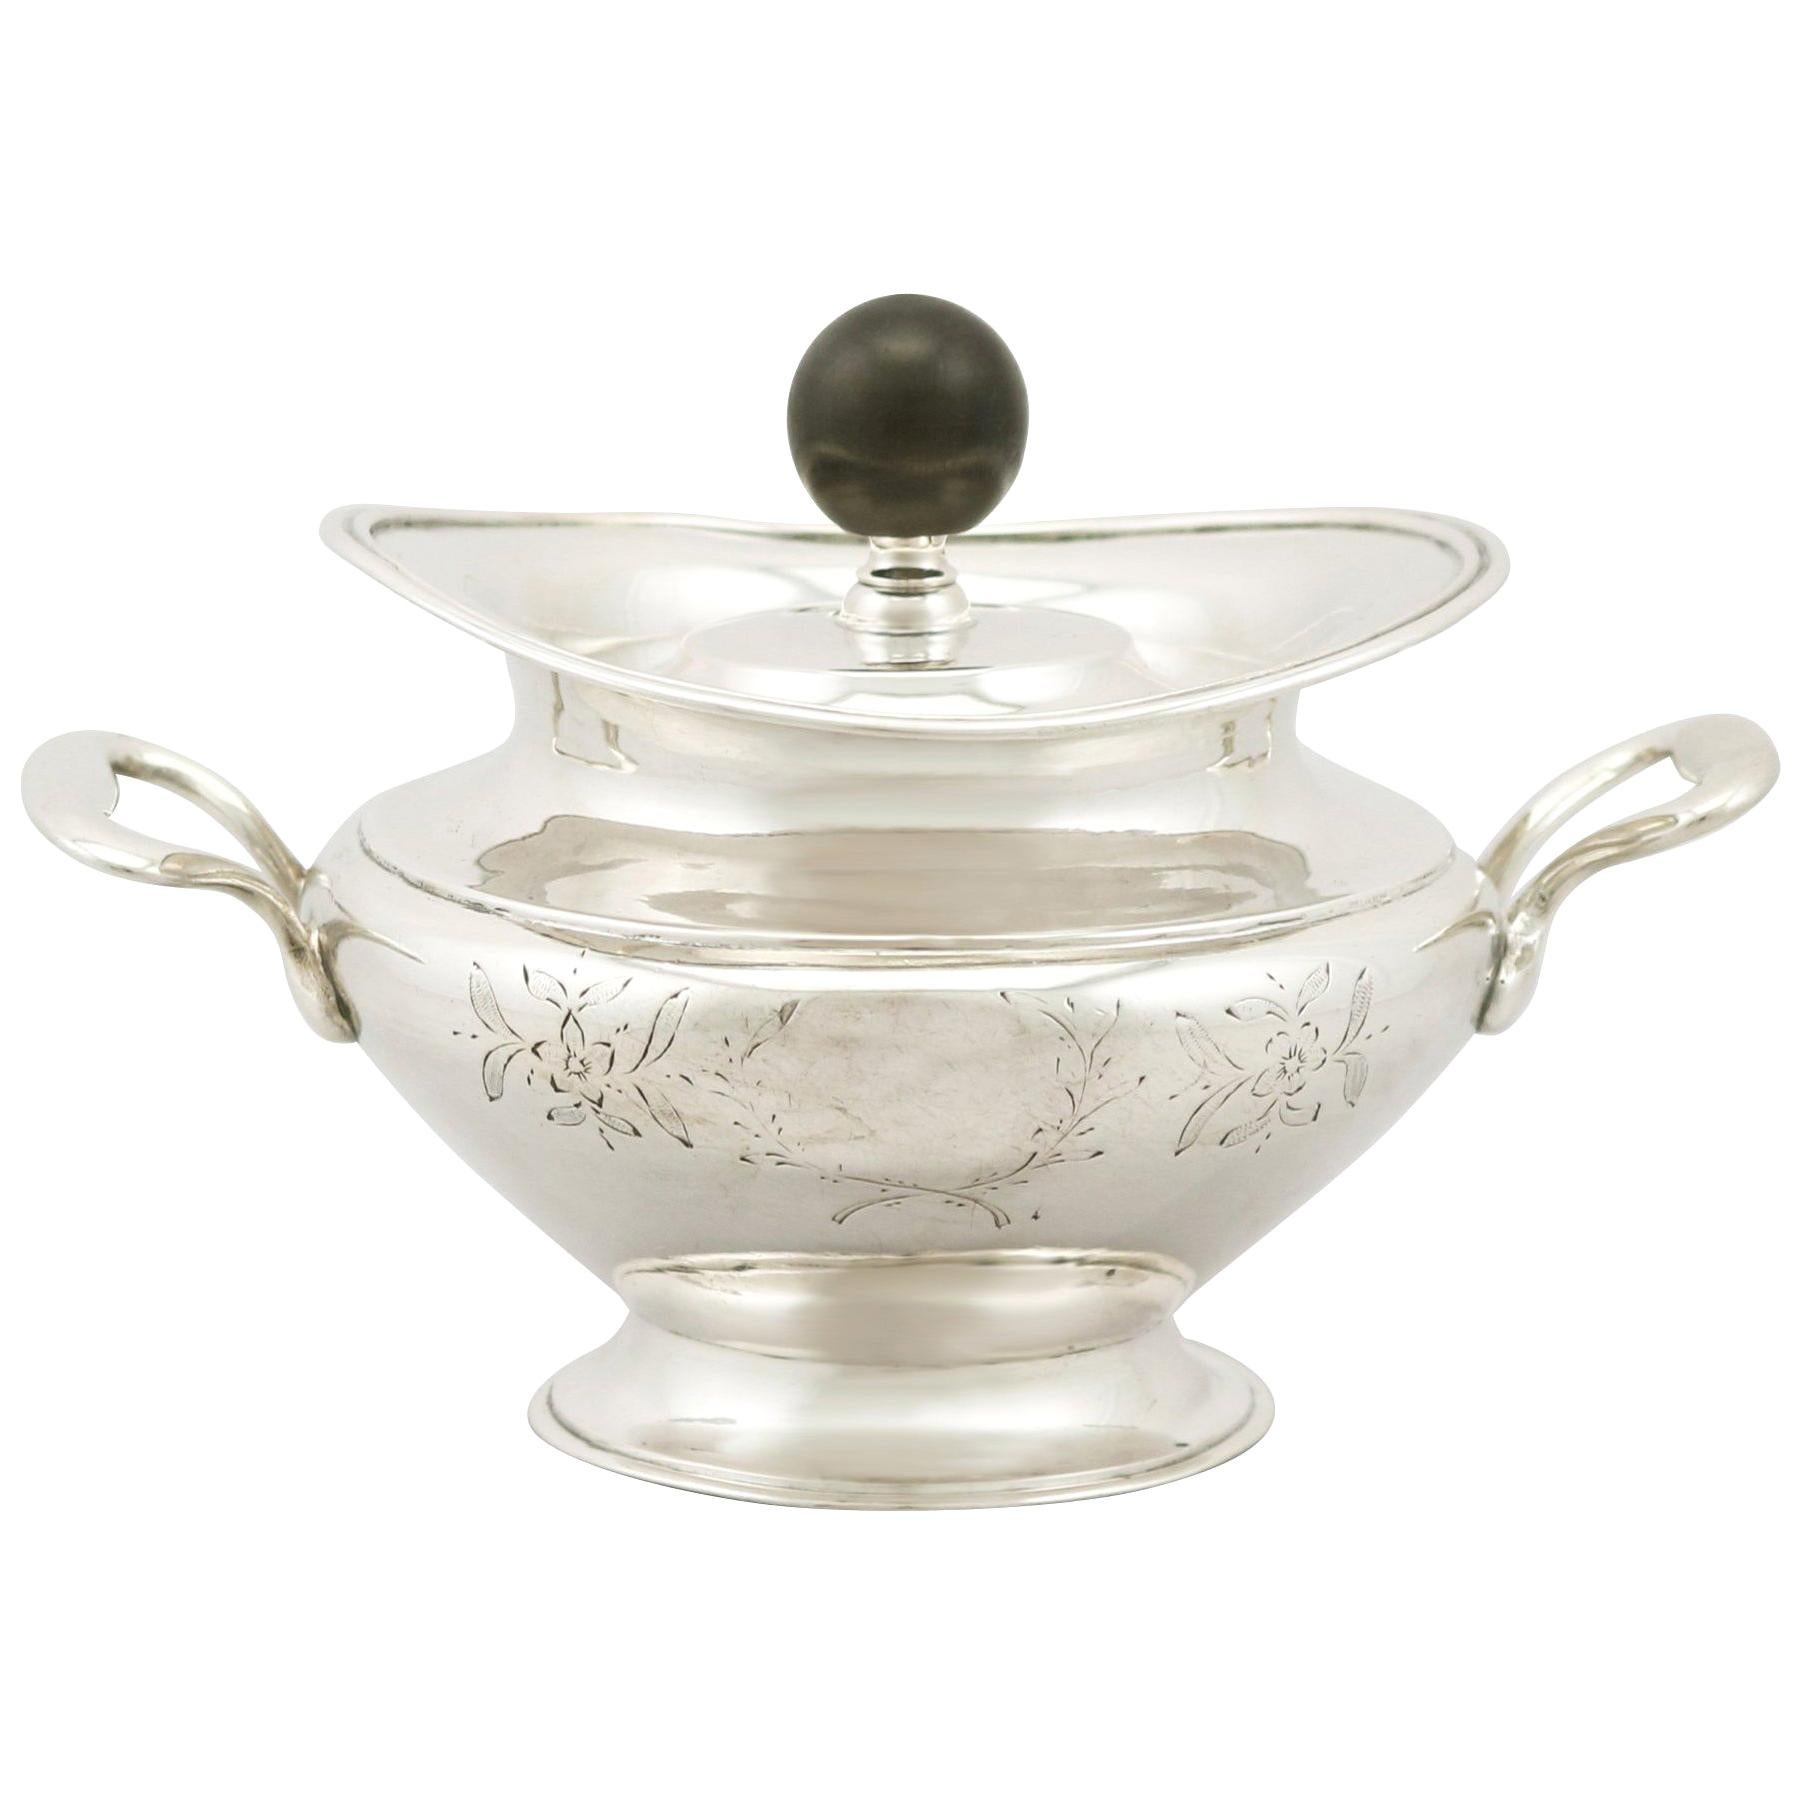 1840s Russian Silver Sugar Bowl and Cover